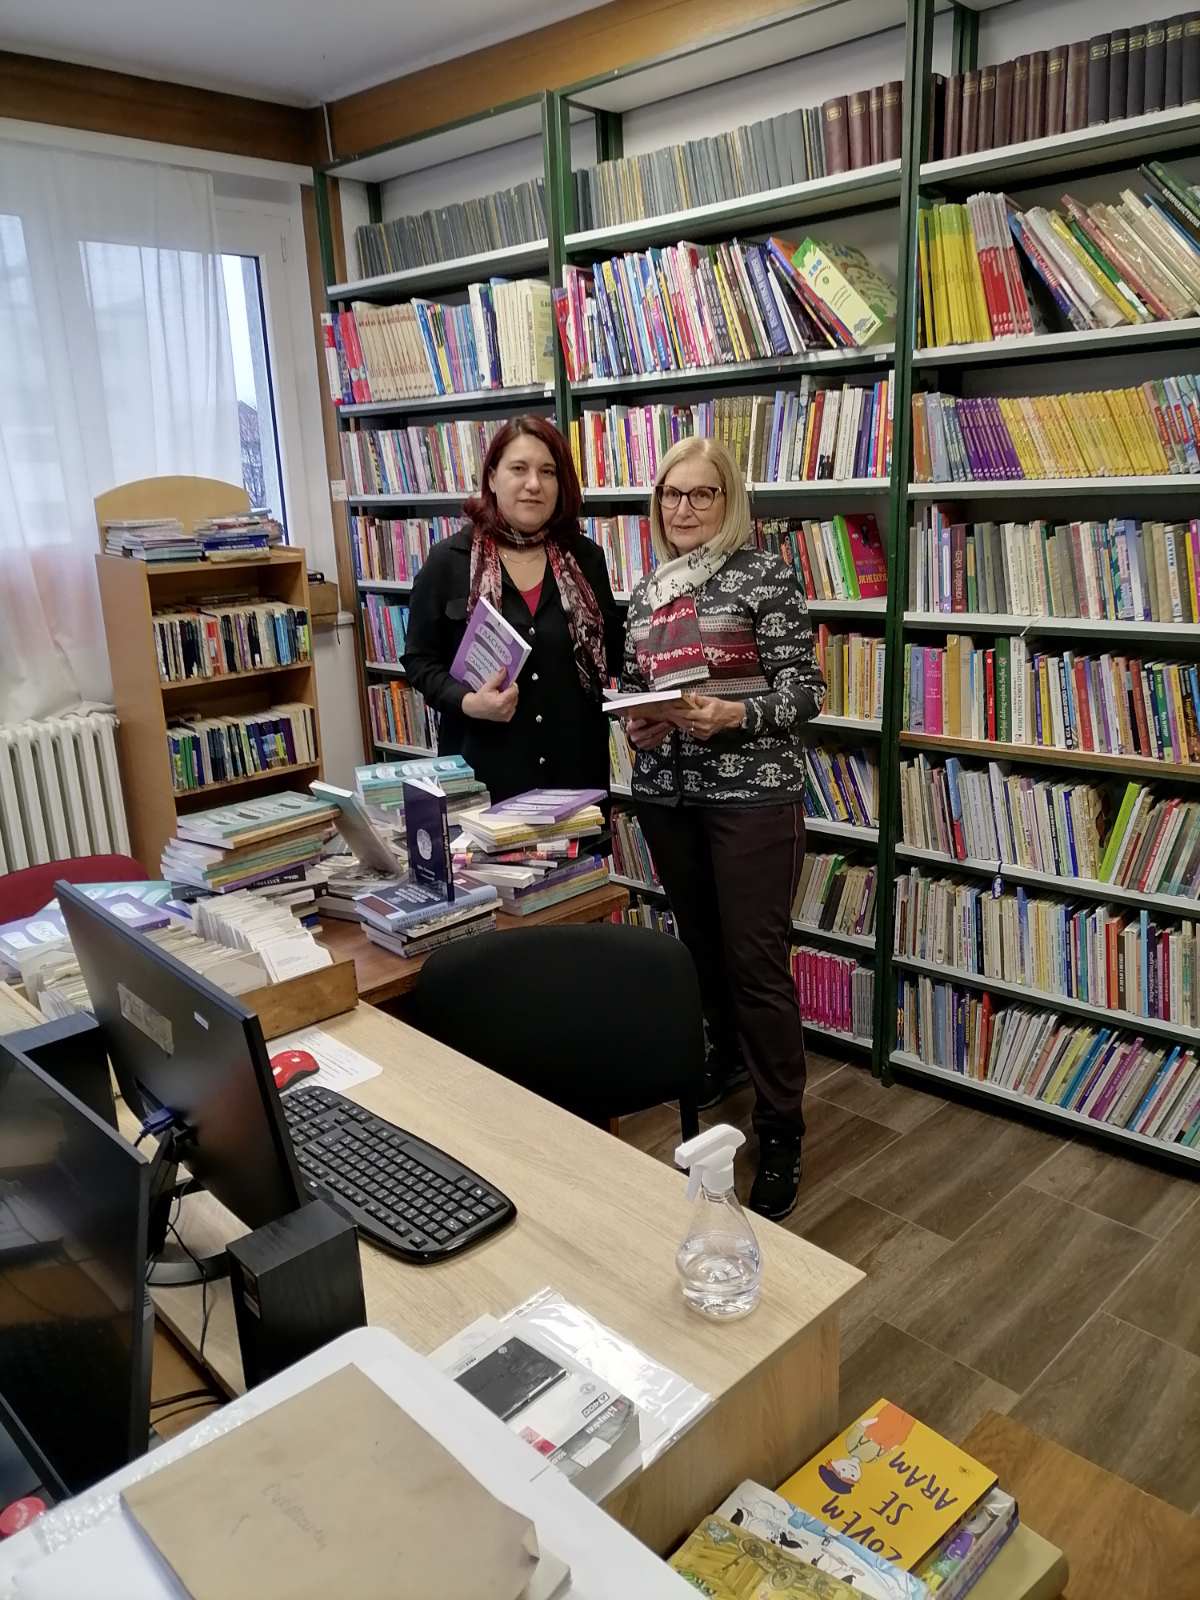 Public Library “Boljevac” and the Library of “Ramonda” Hotel at Rtanj presented with the Institute`s publications